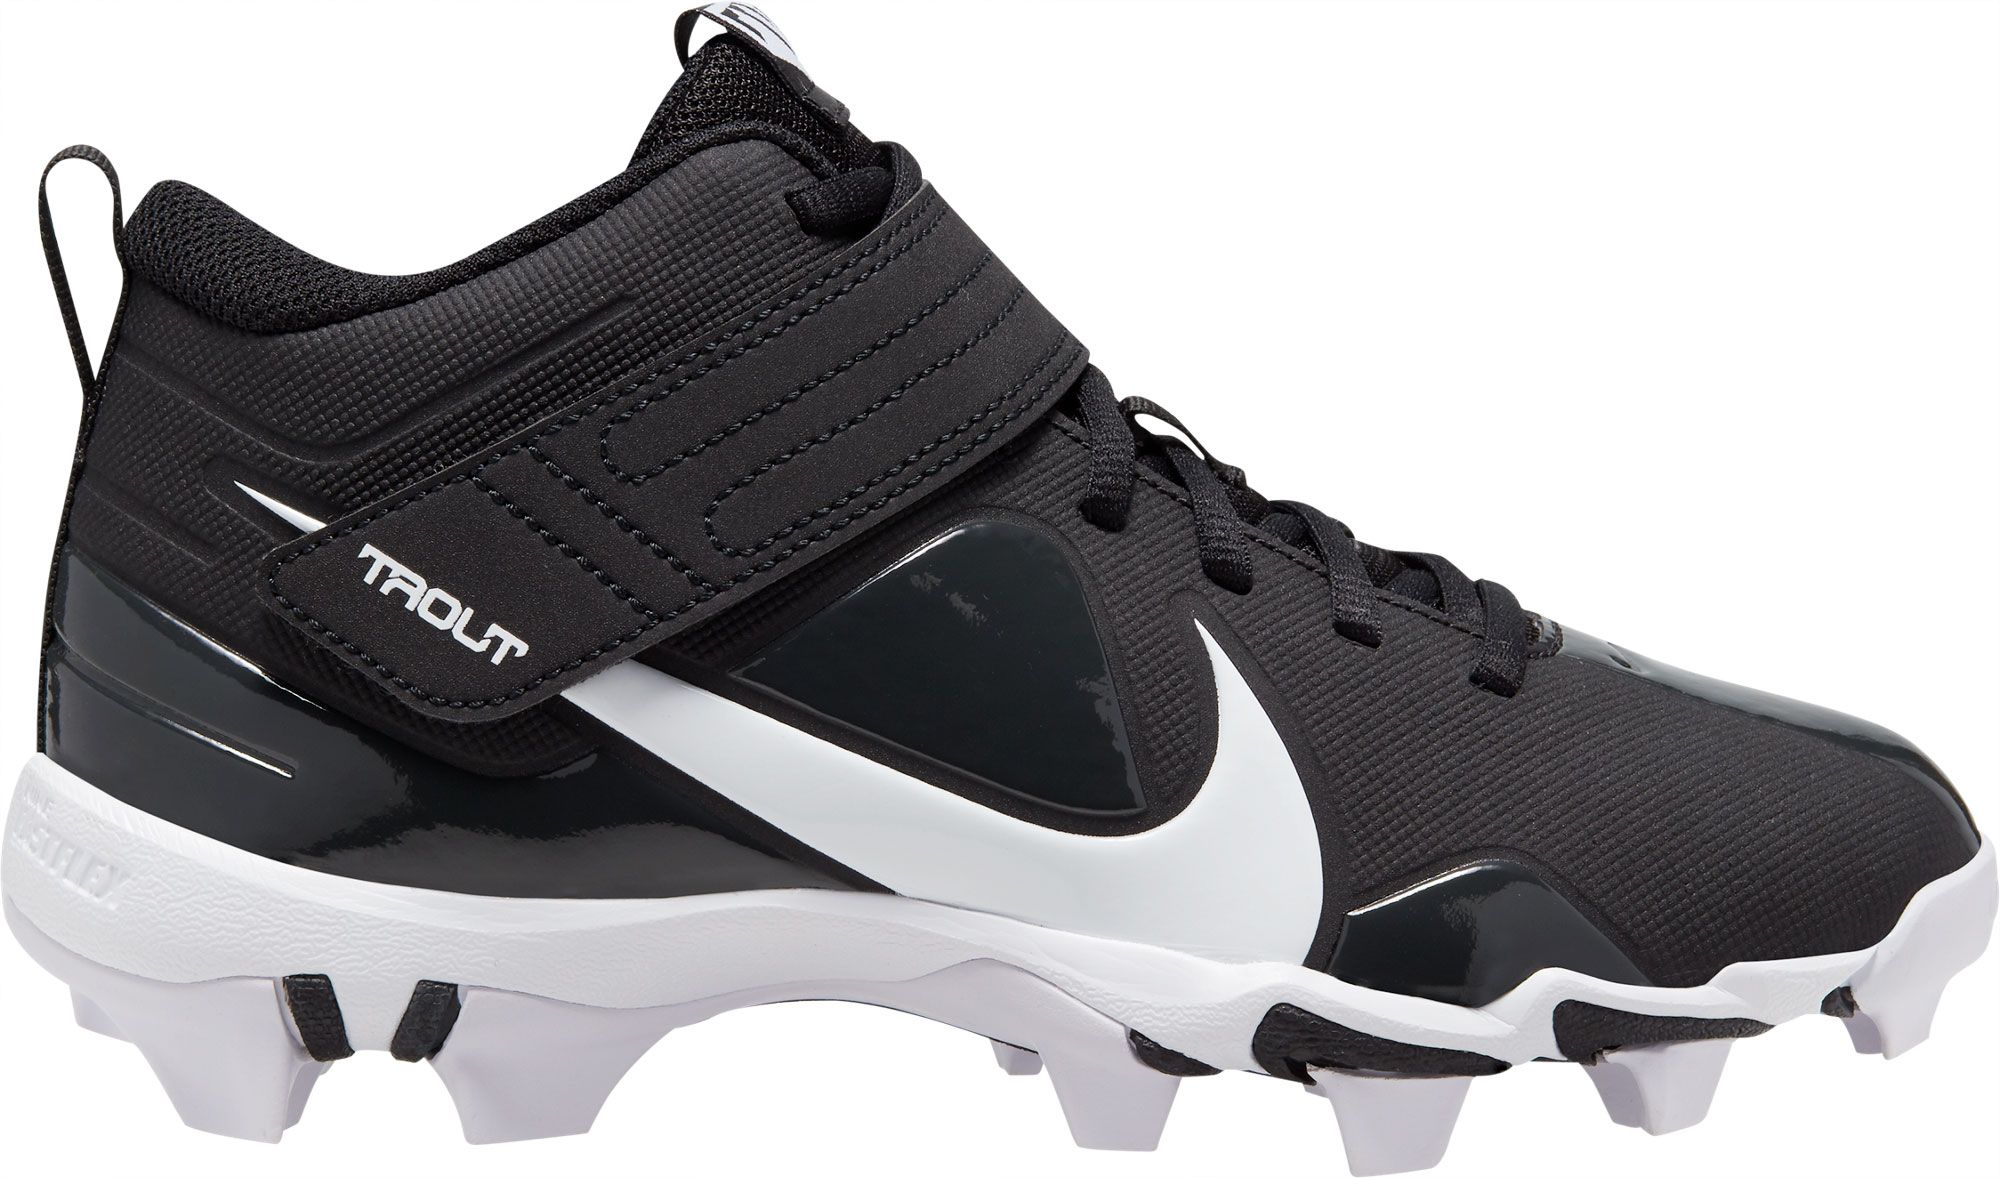 nike force trout 5 youth